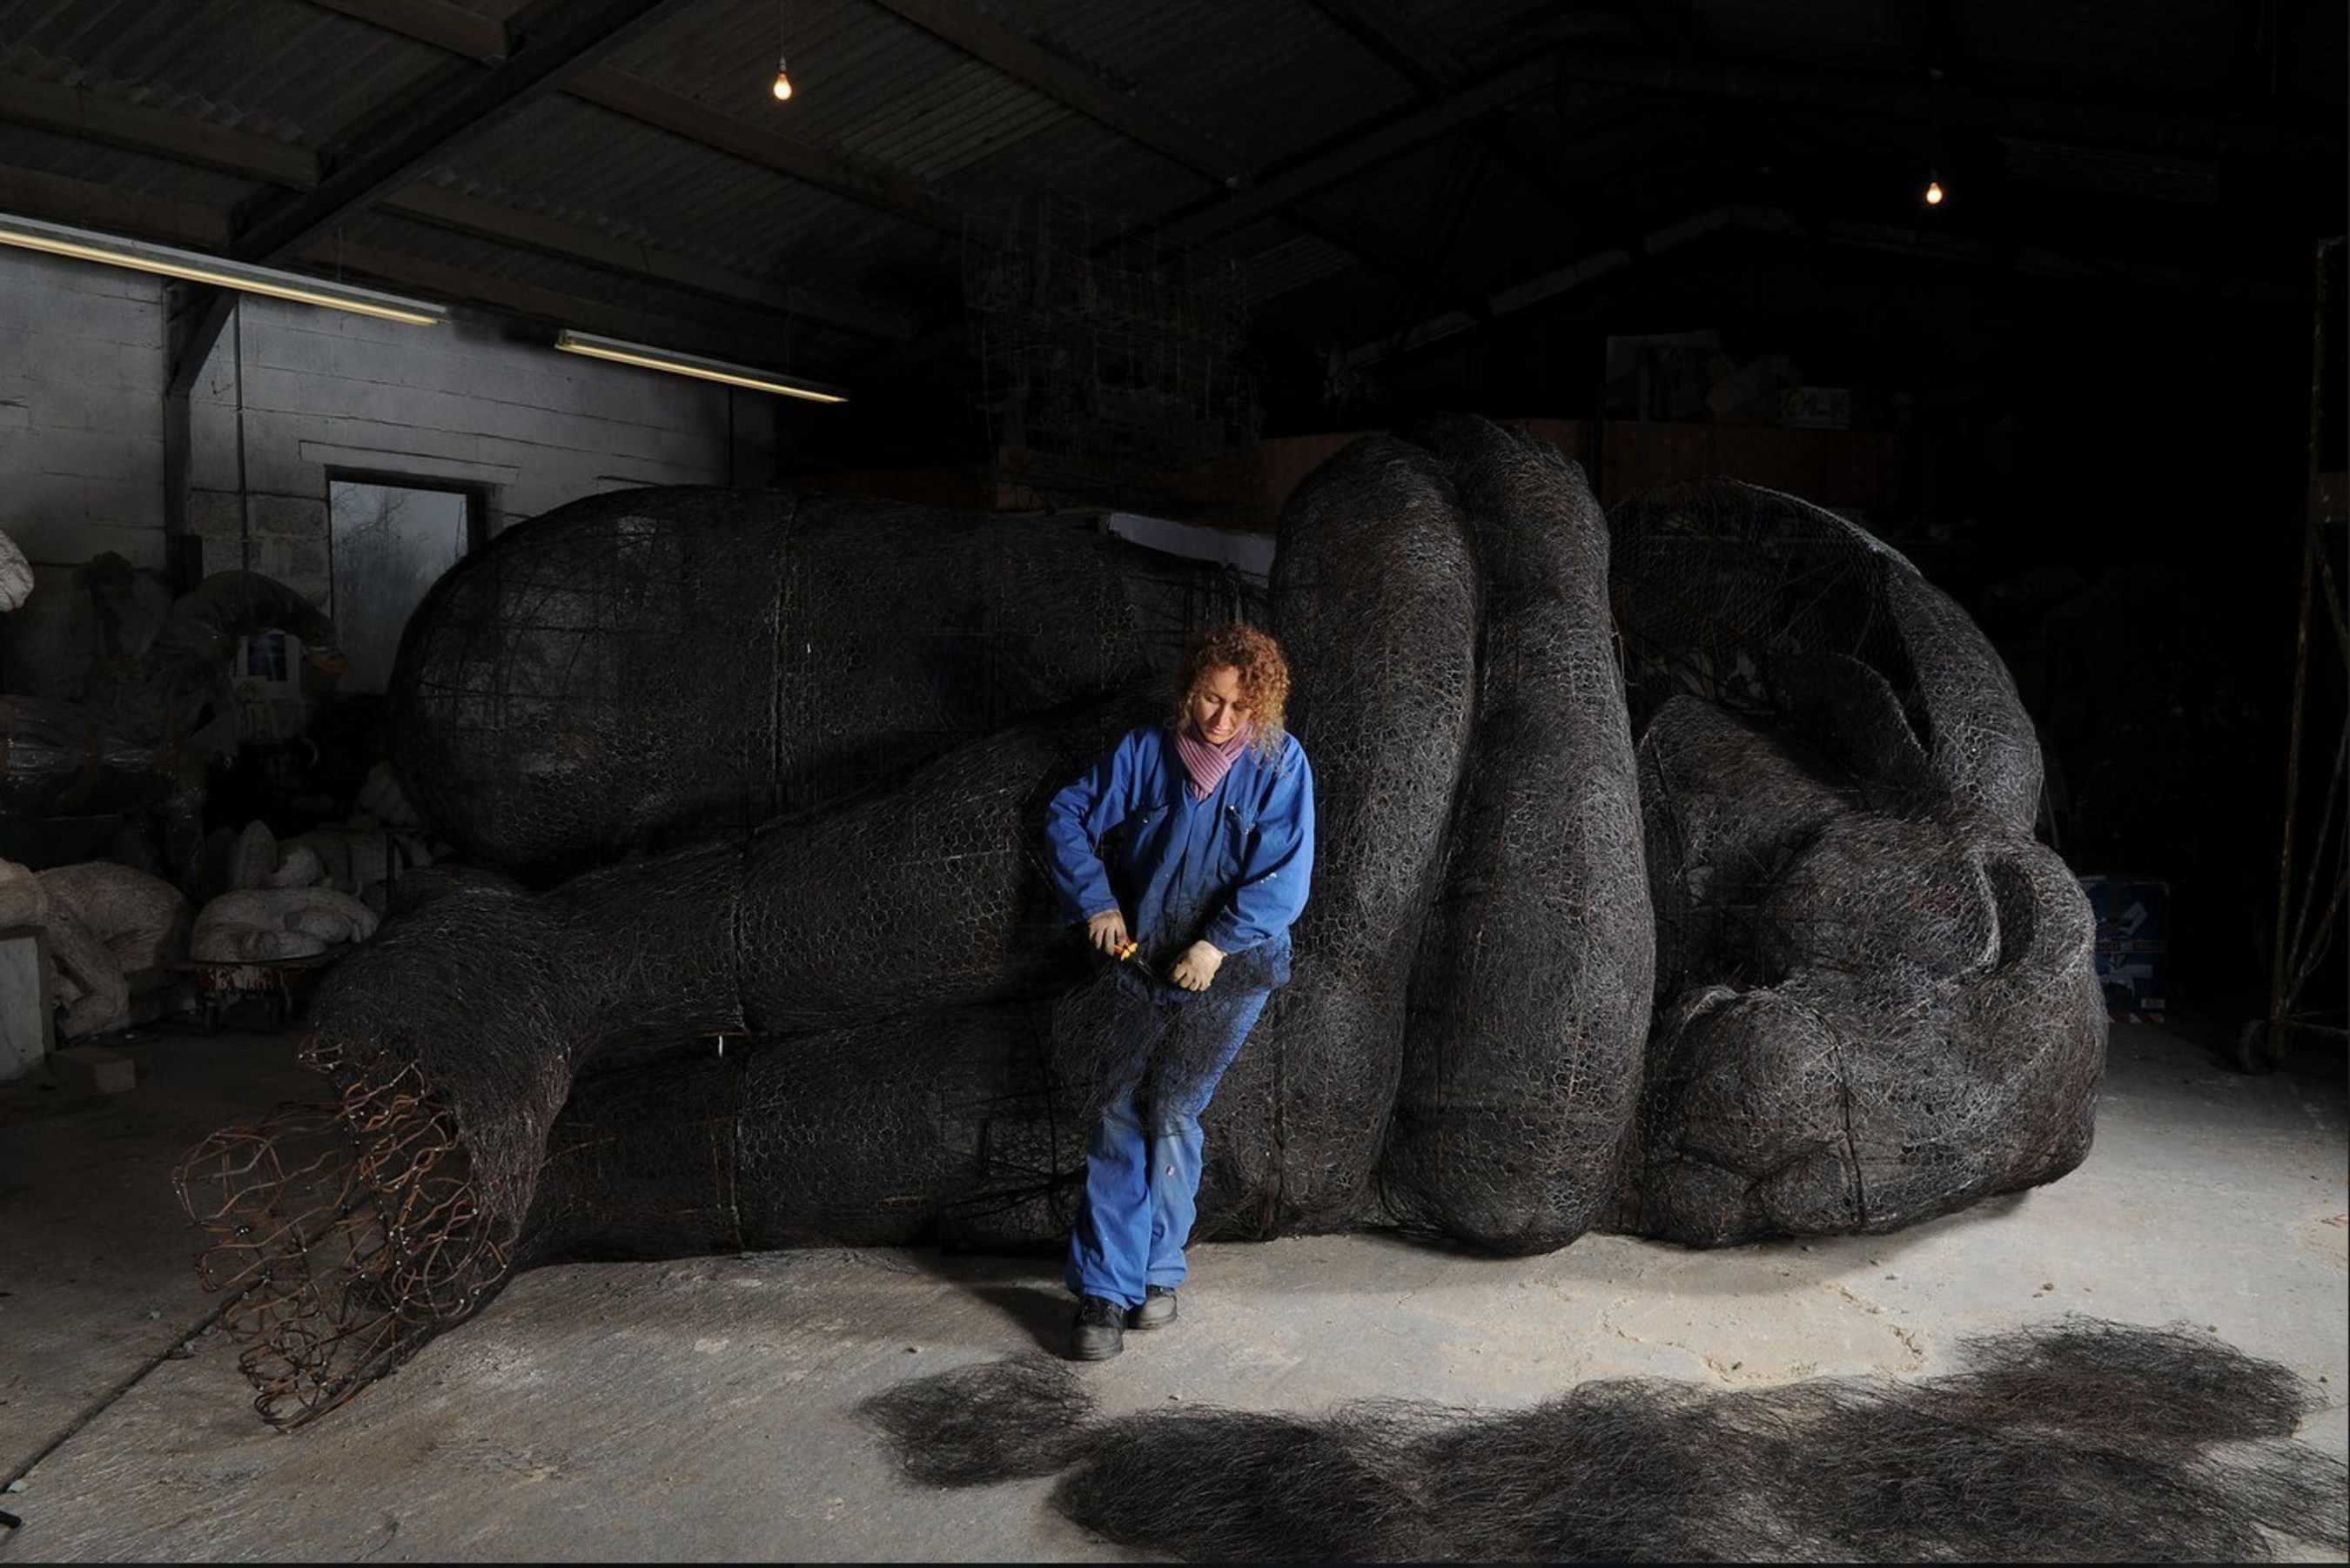 Sophie Ryder working on "Curled Up No. 2"